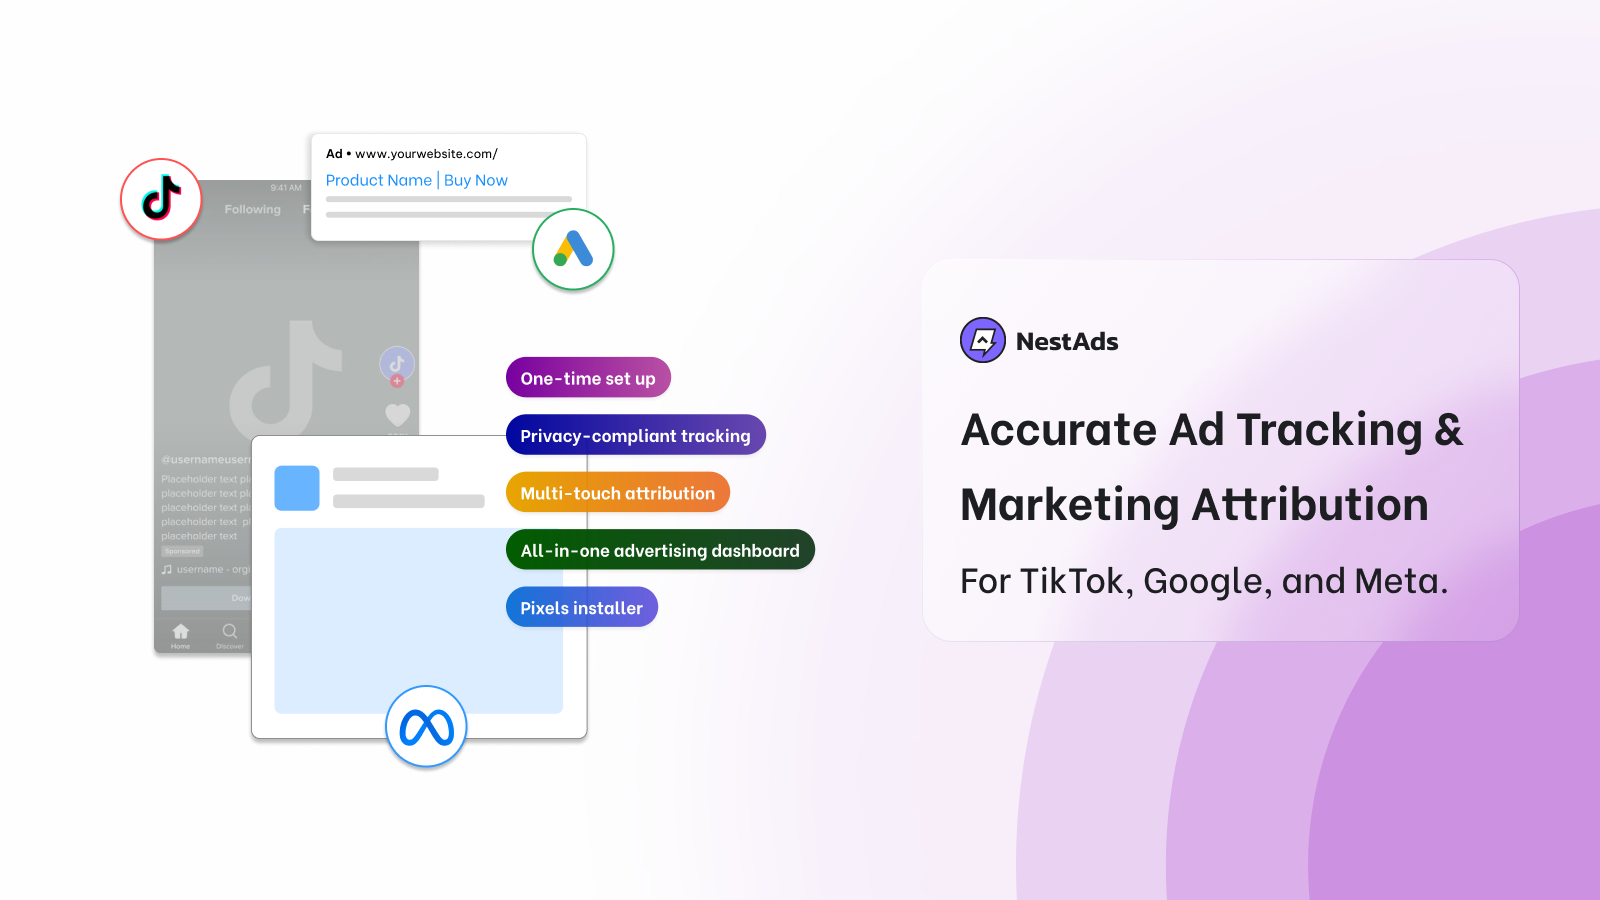 Accurate ad tracking & marketing attribution